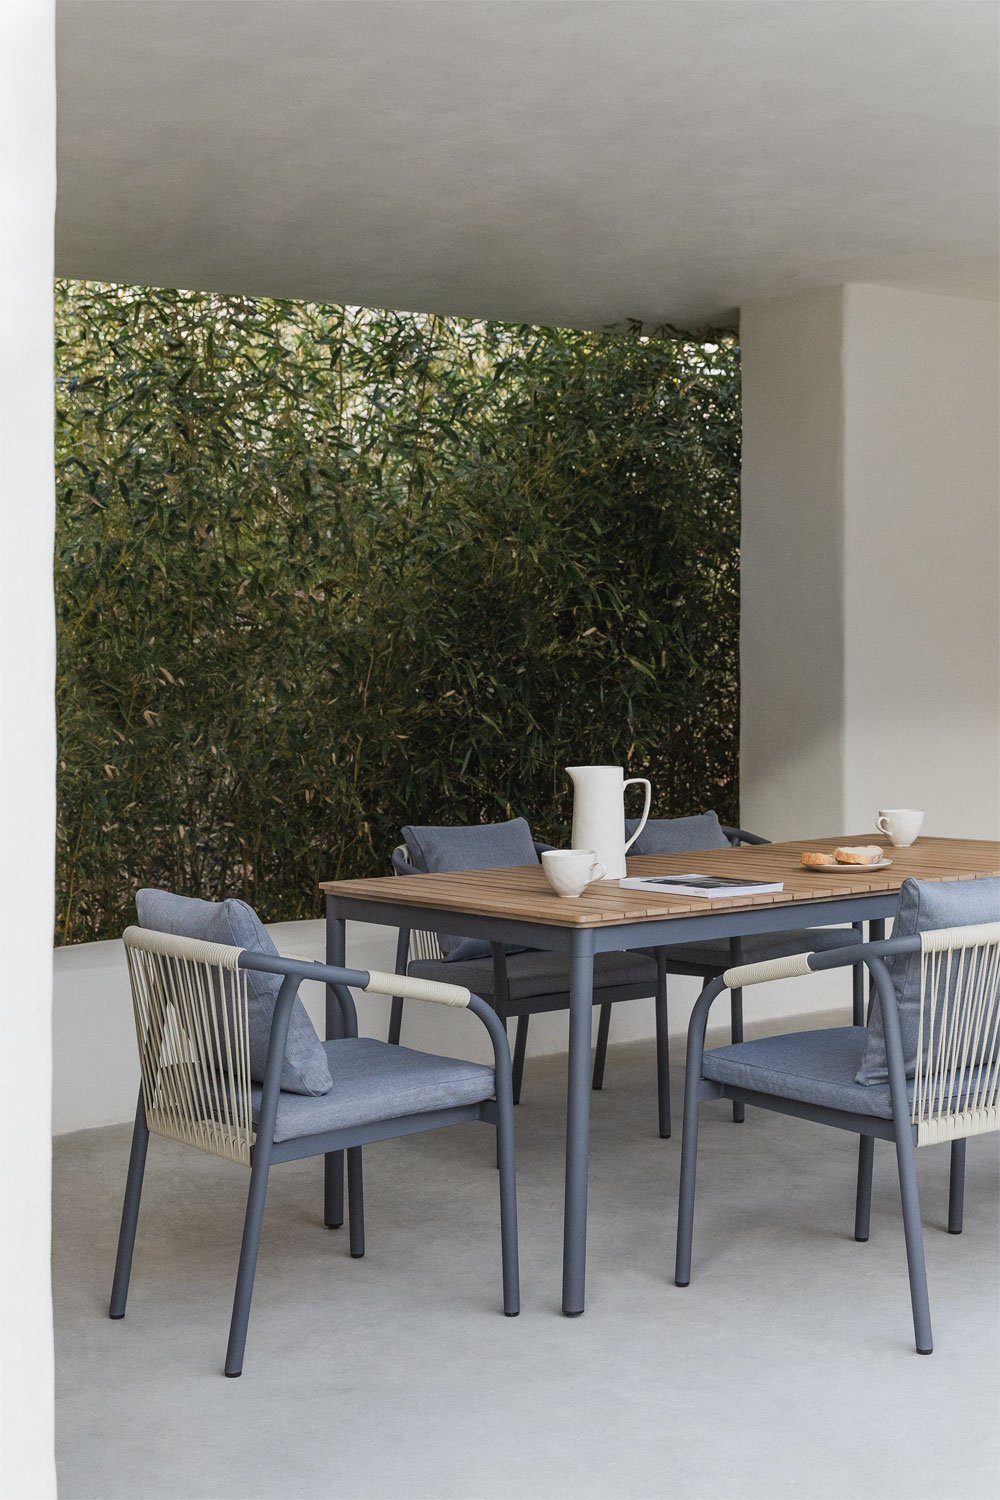 Basper Rectangular Table Set (180x90 cm) and 6 Garden Chairs in Aluminum and Acacia Wood, gallery image 1